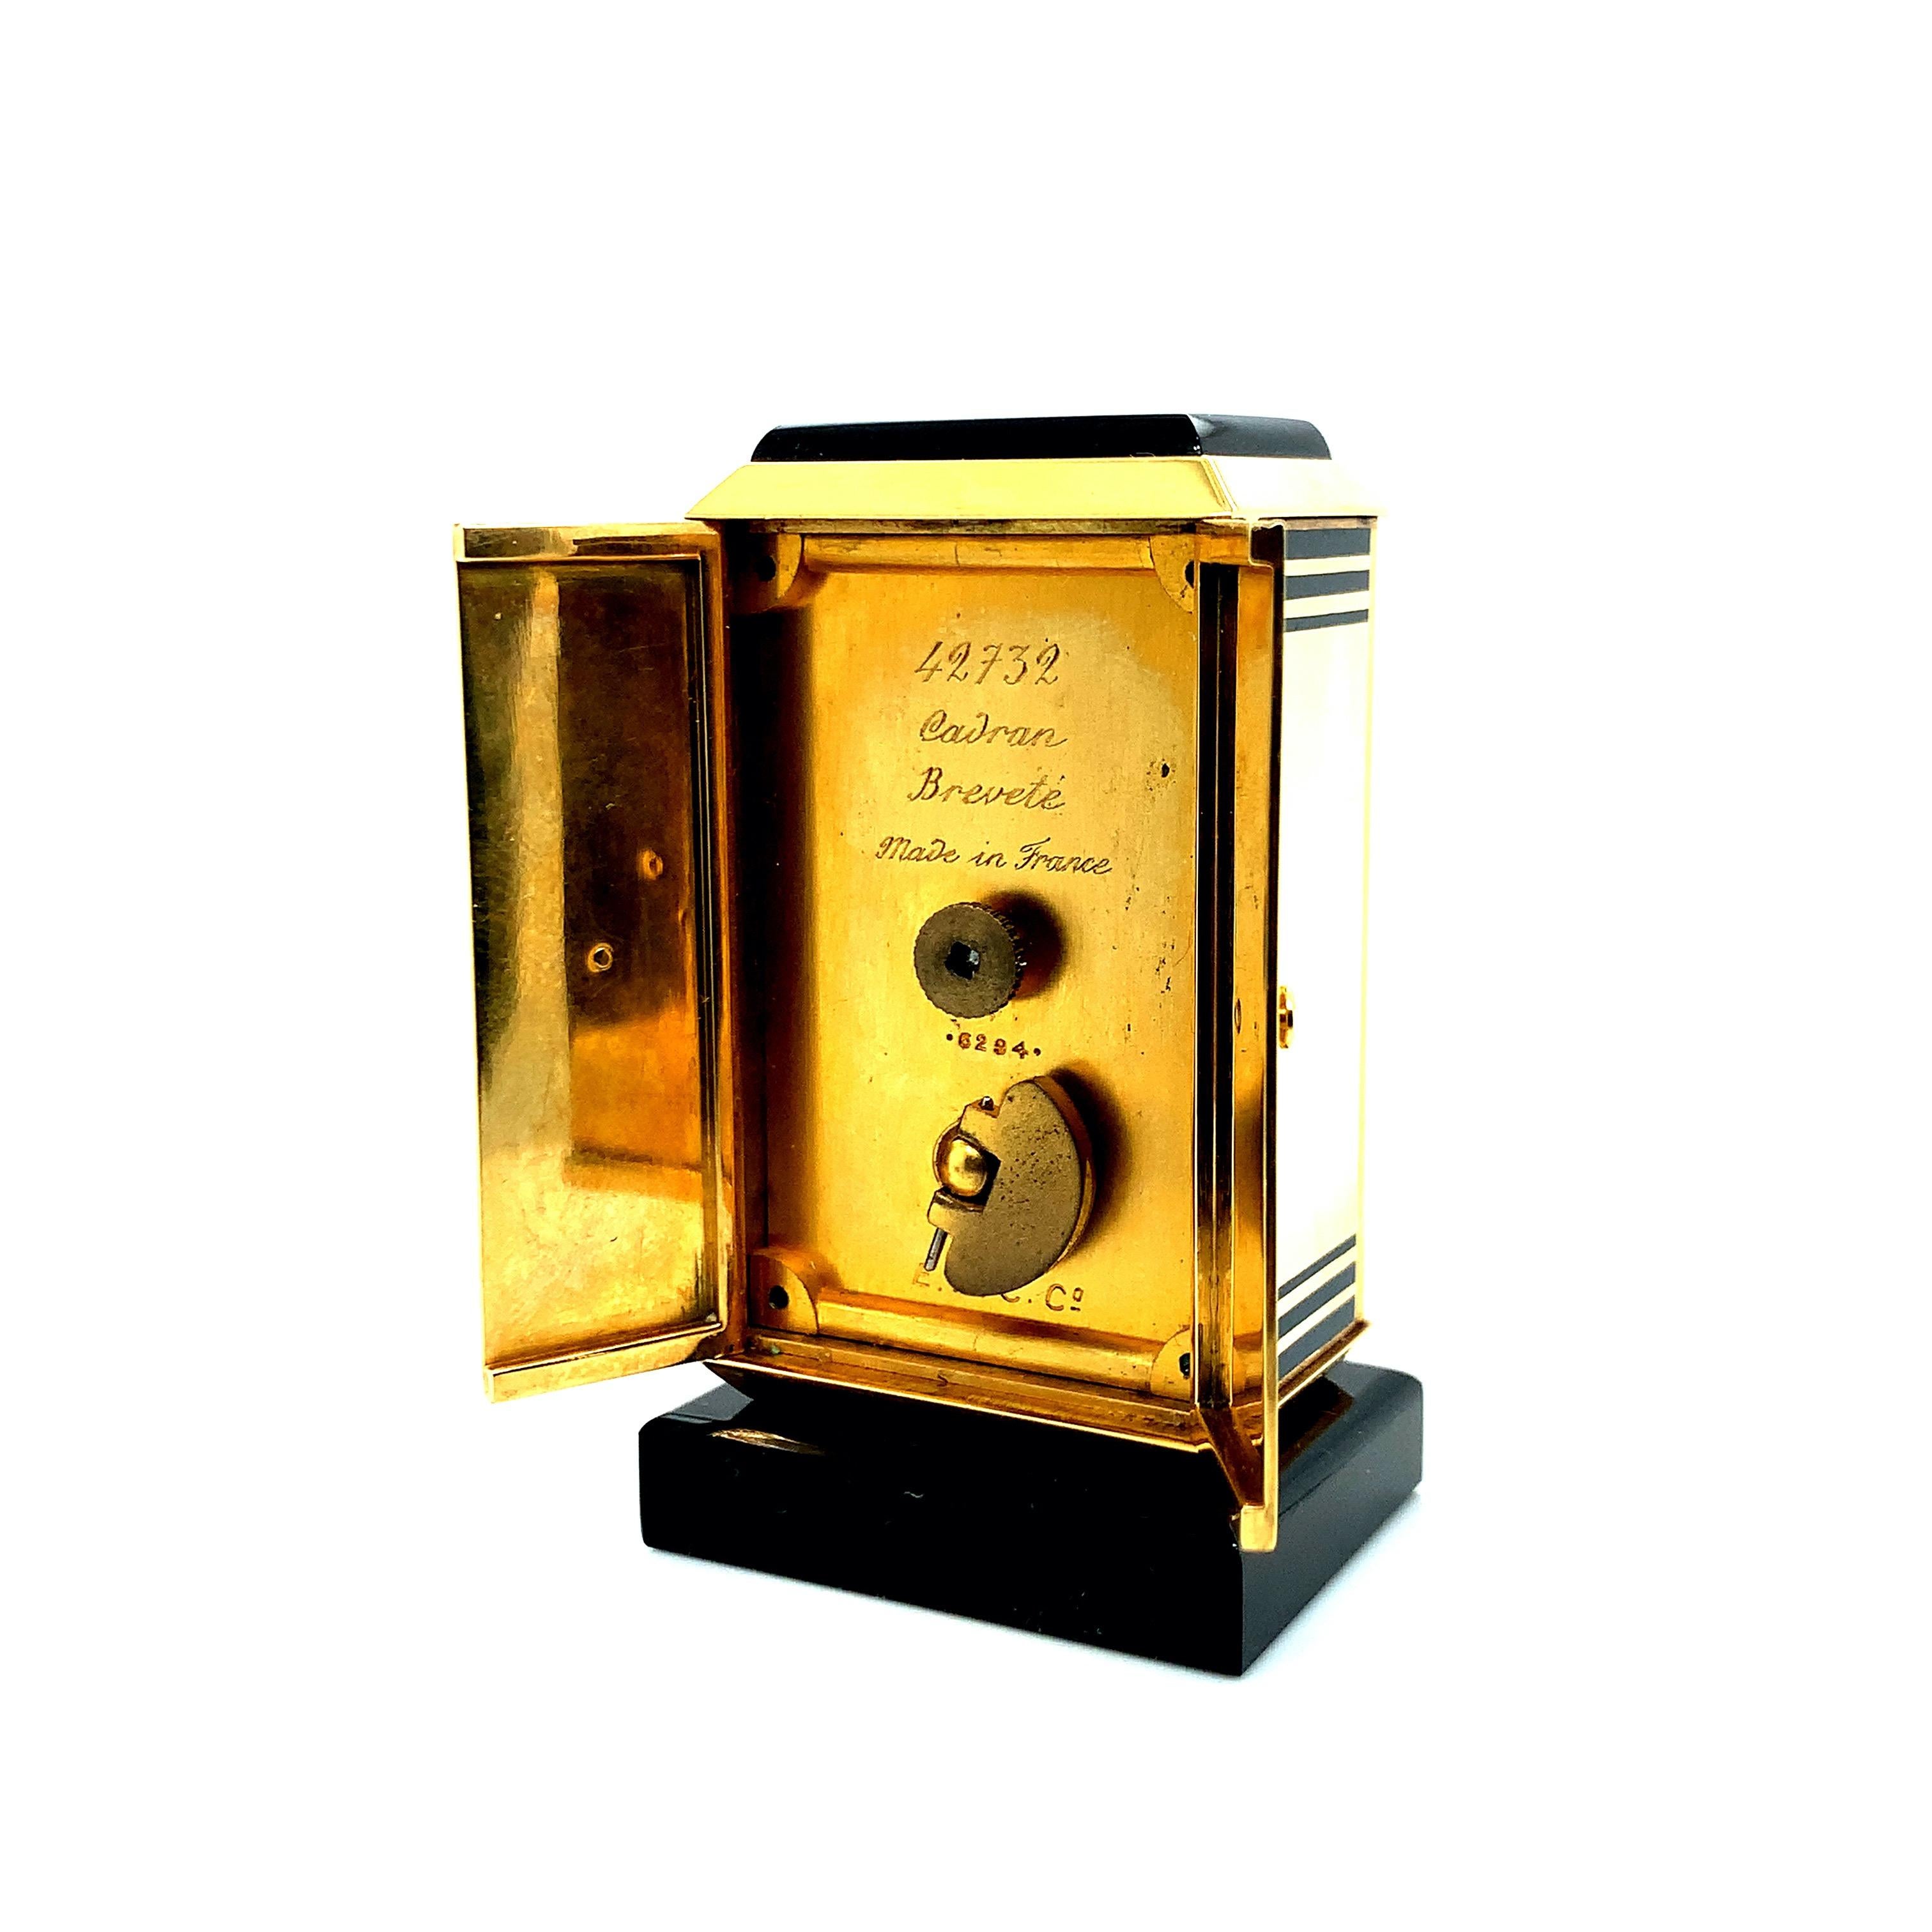 Cartier Art Deco Era Travel Clock In Excellent Condition For Sale In New York, NY